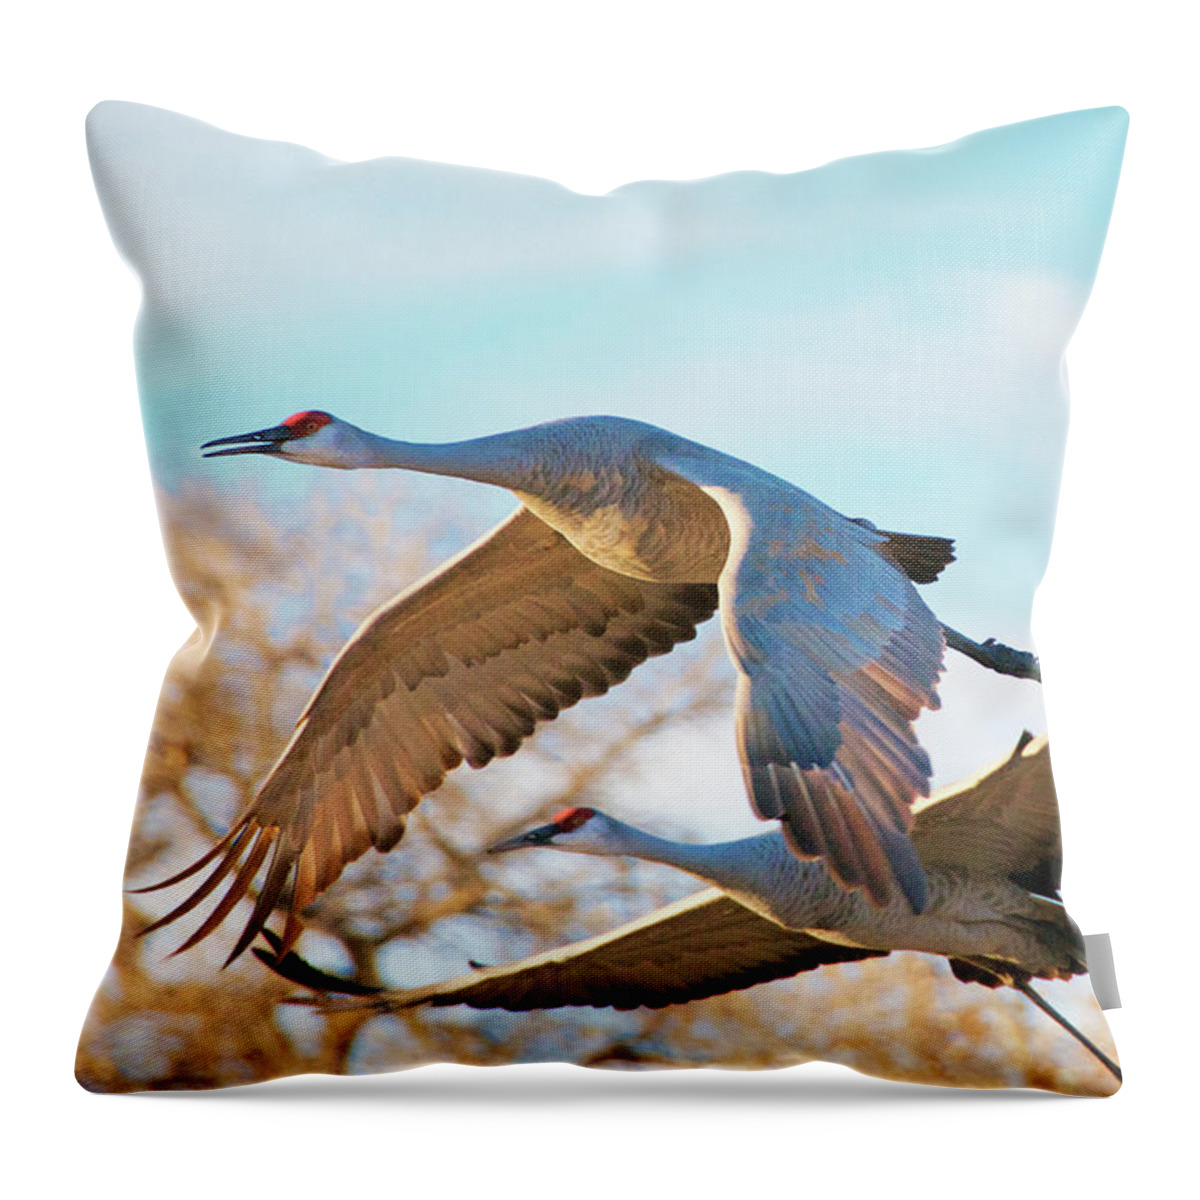 Sandhill Cranes Throw Pillow featuring the photograph Winged Endeavor, Sandhill Cranes by Zayne Diamond